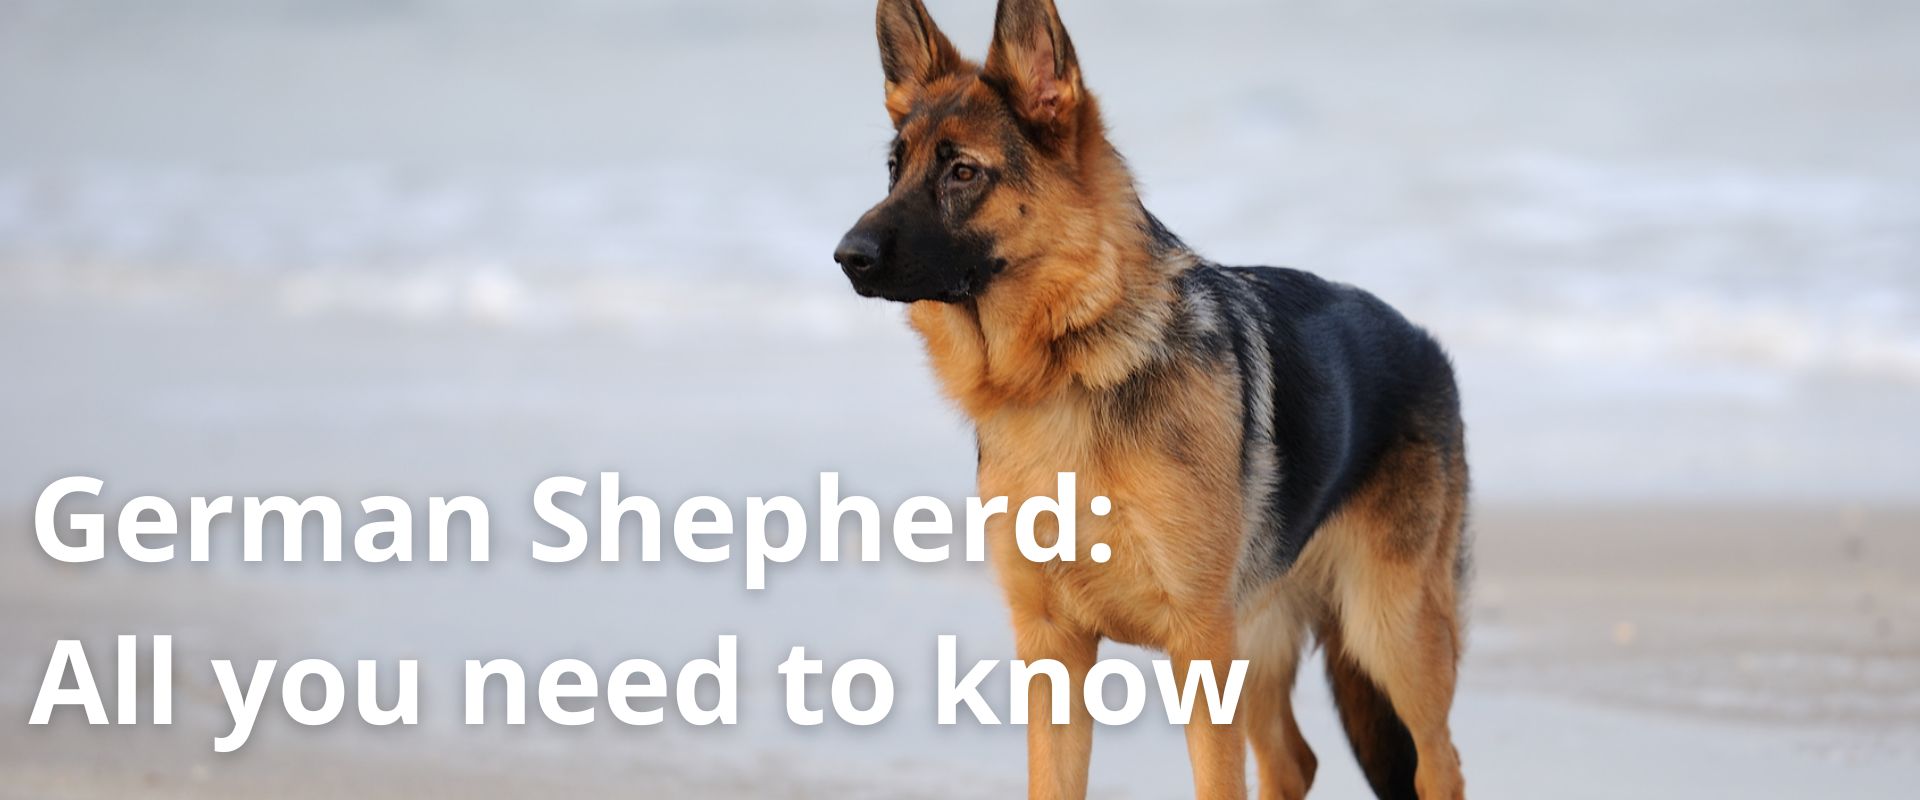 german shepherd all you need to know